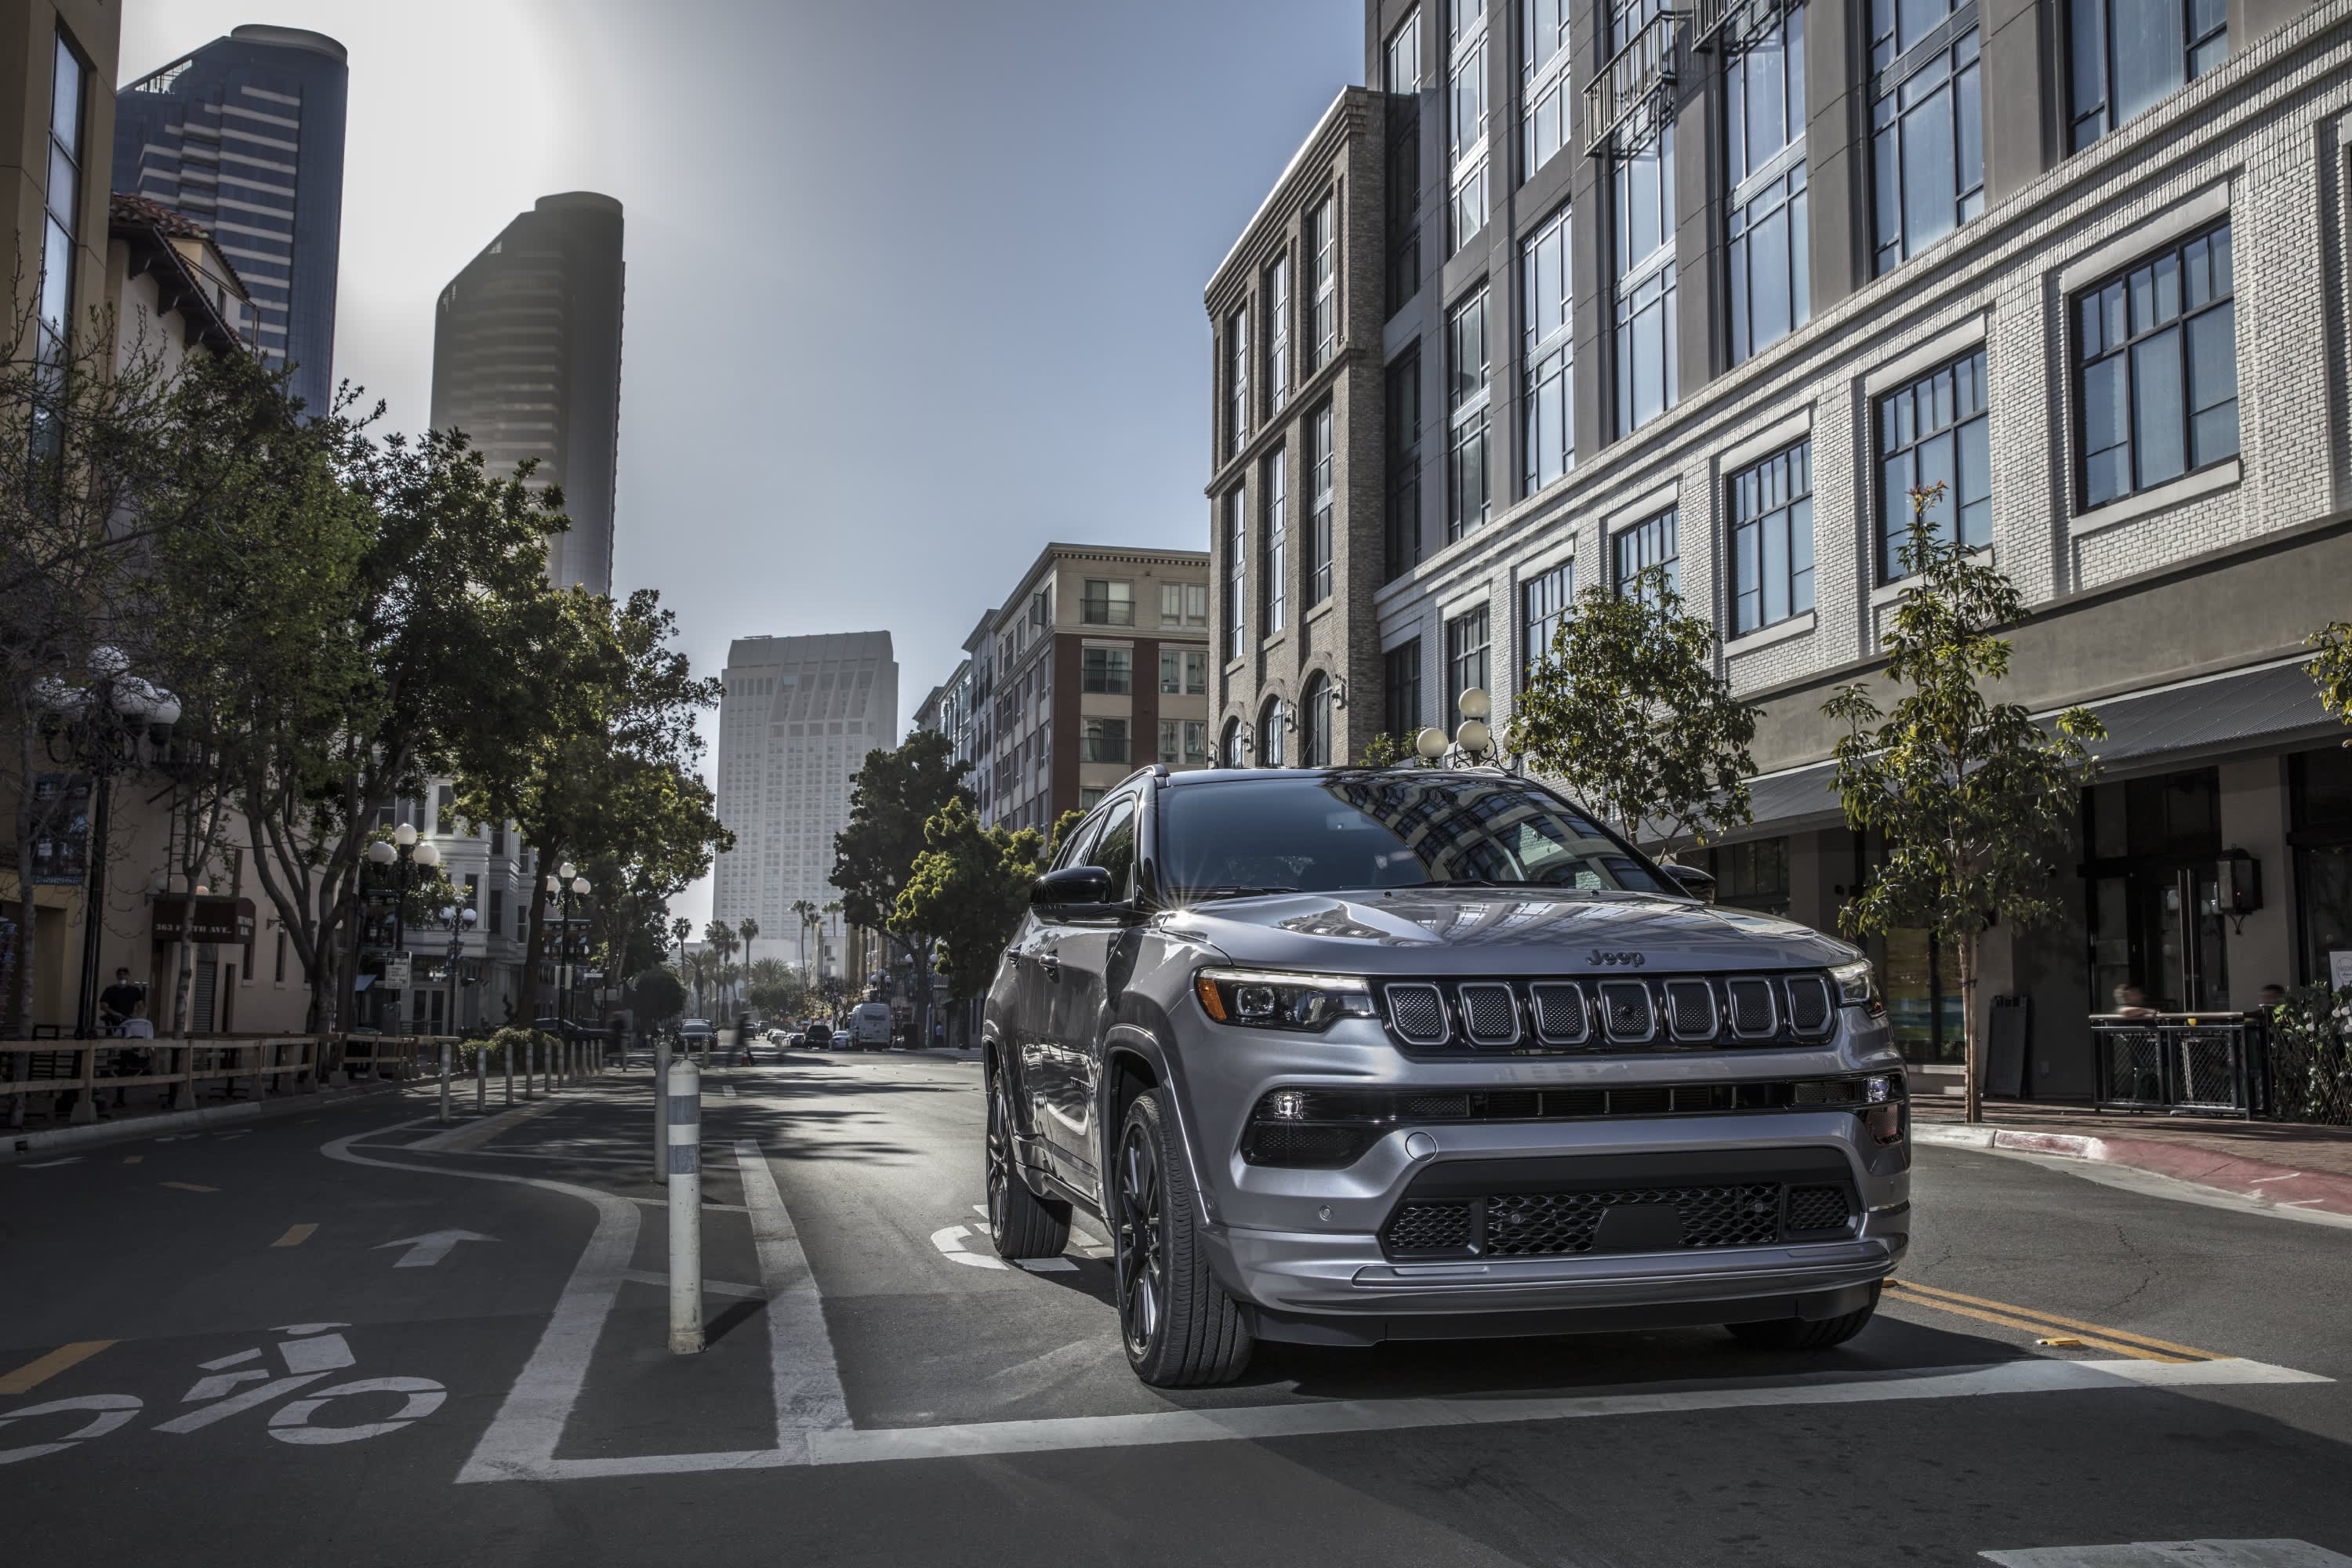 Jeep unveils new small Compass SUV ahead of EV push